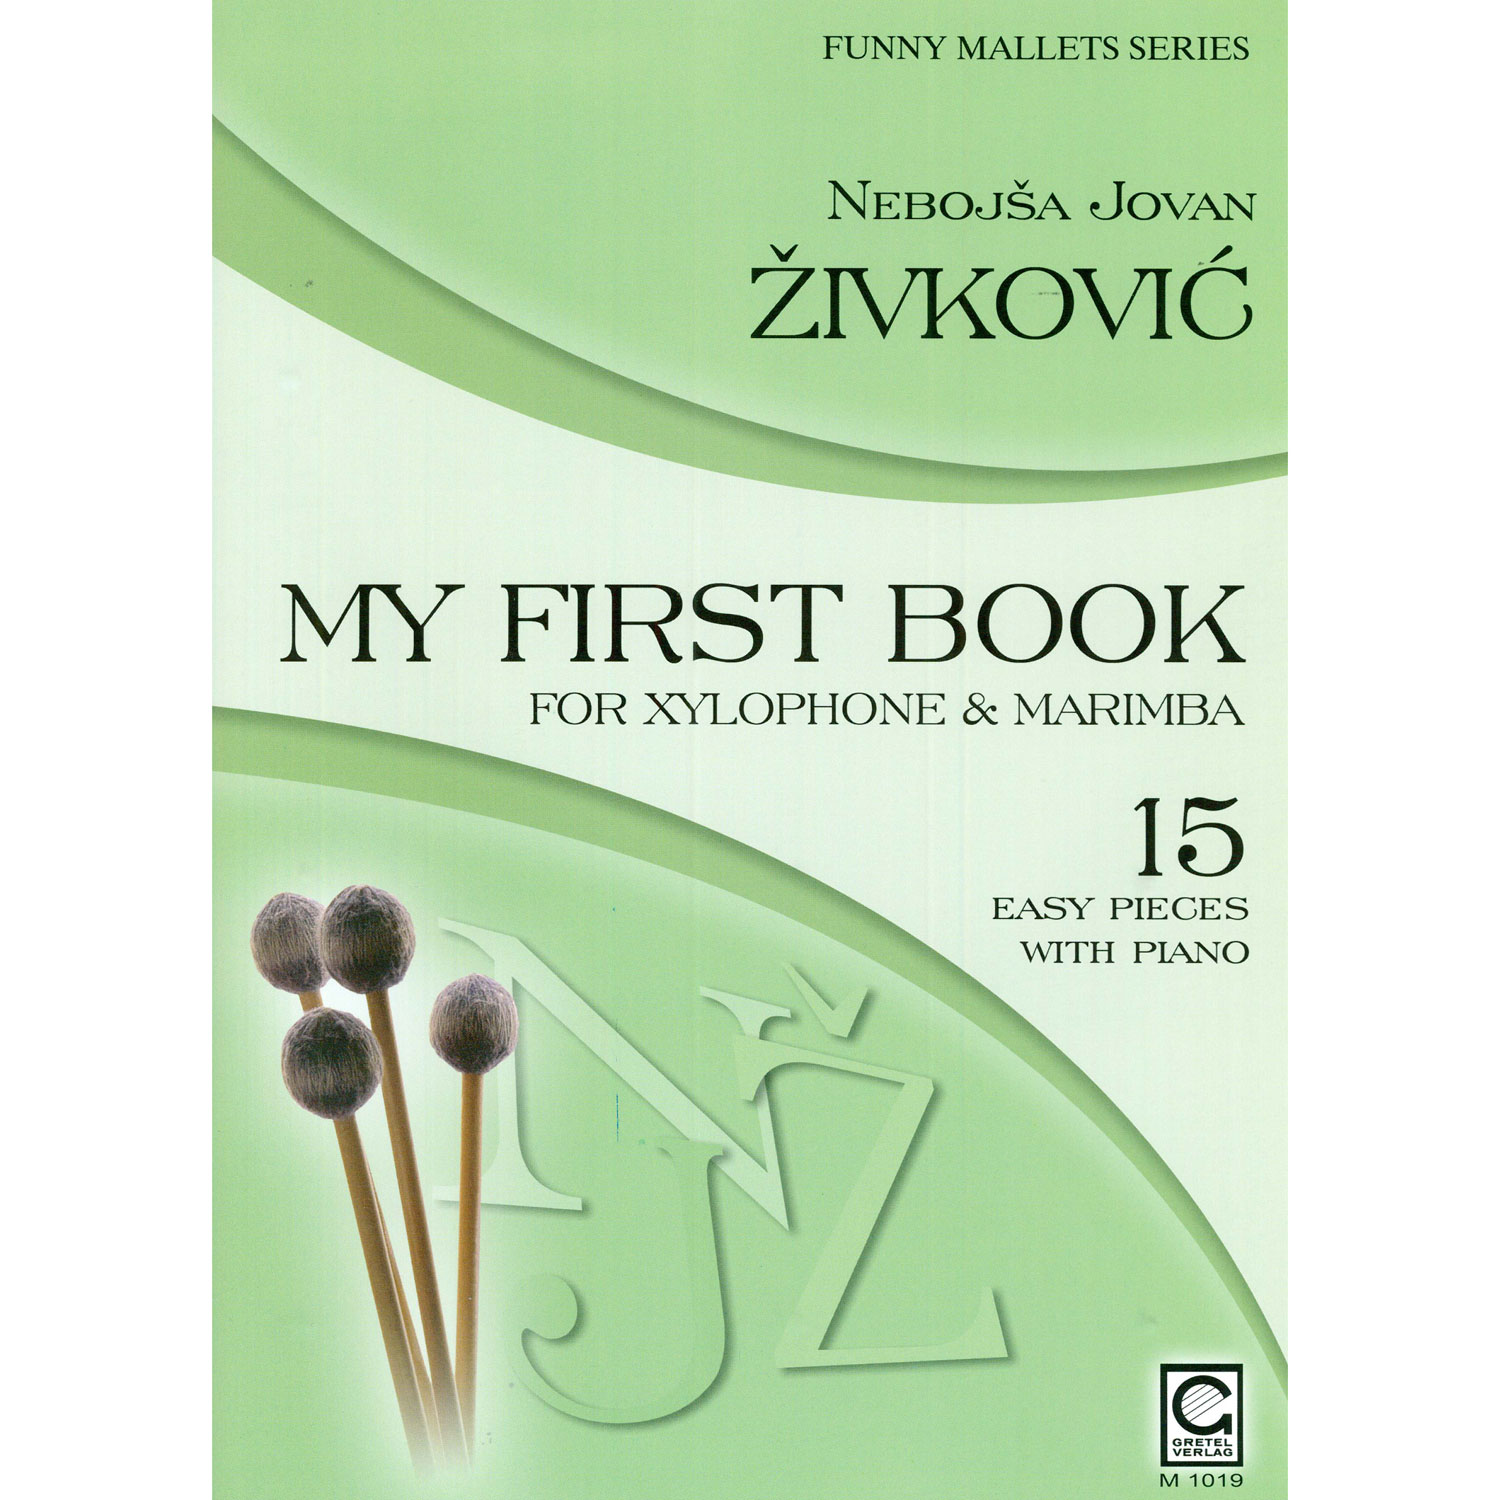 My First Book (for xylophone & marimba)